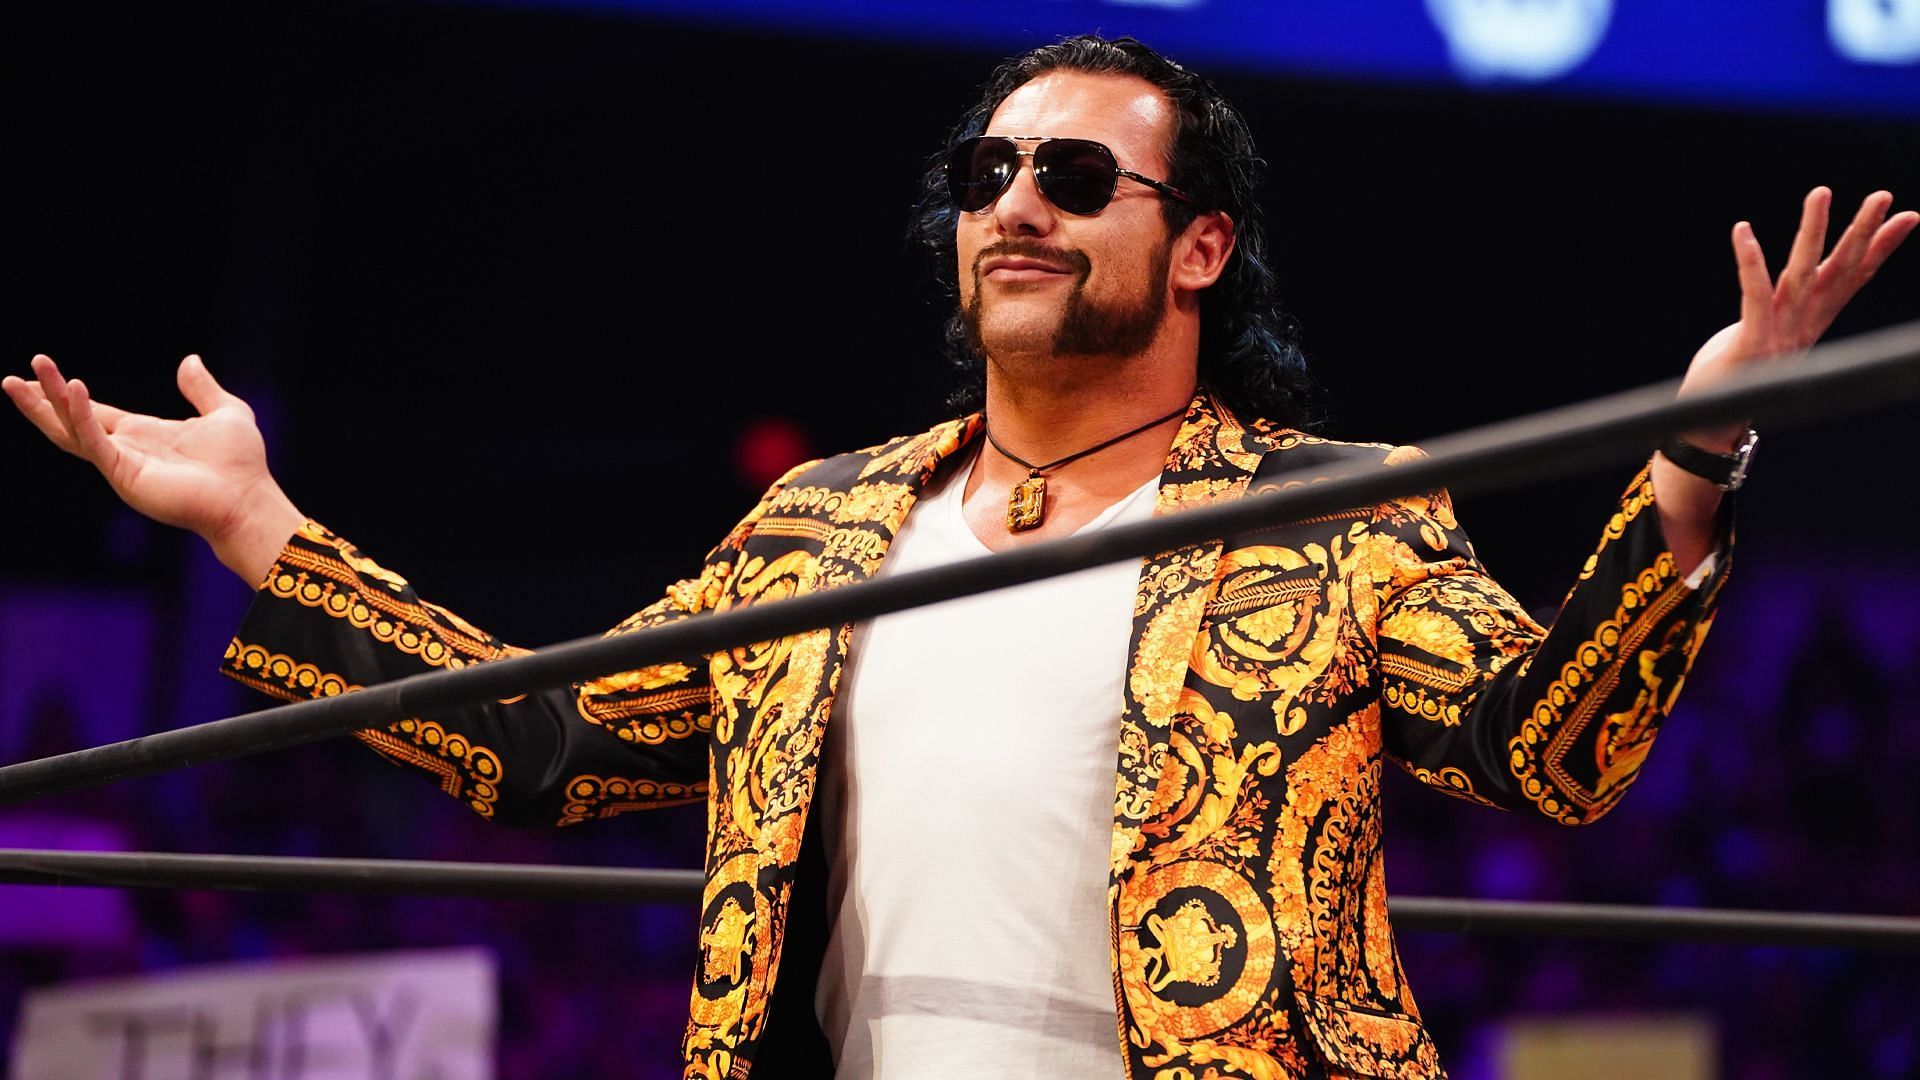 Omega is a former AEW World Champion (image credit: All Elite Wrestling)